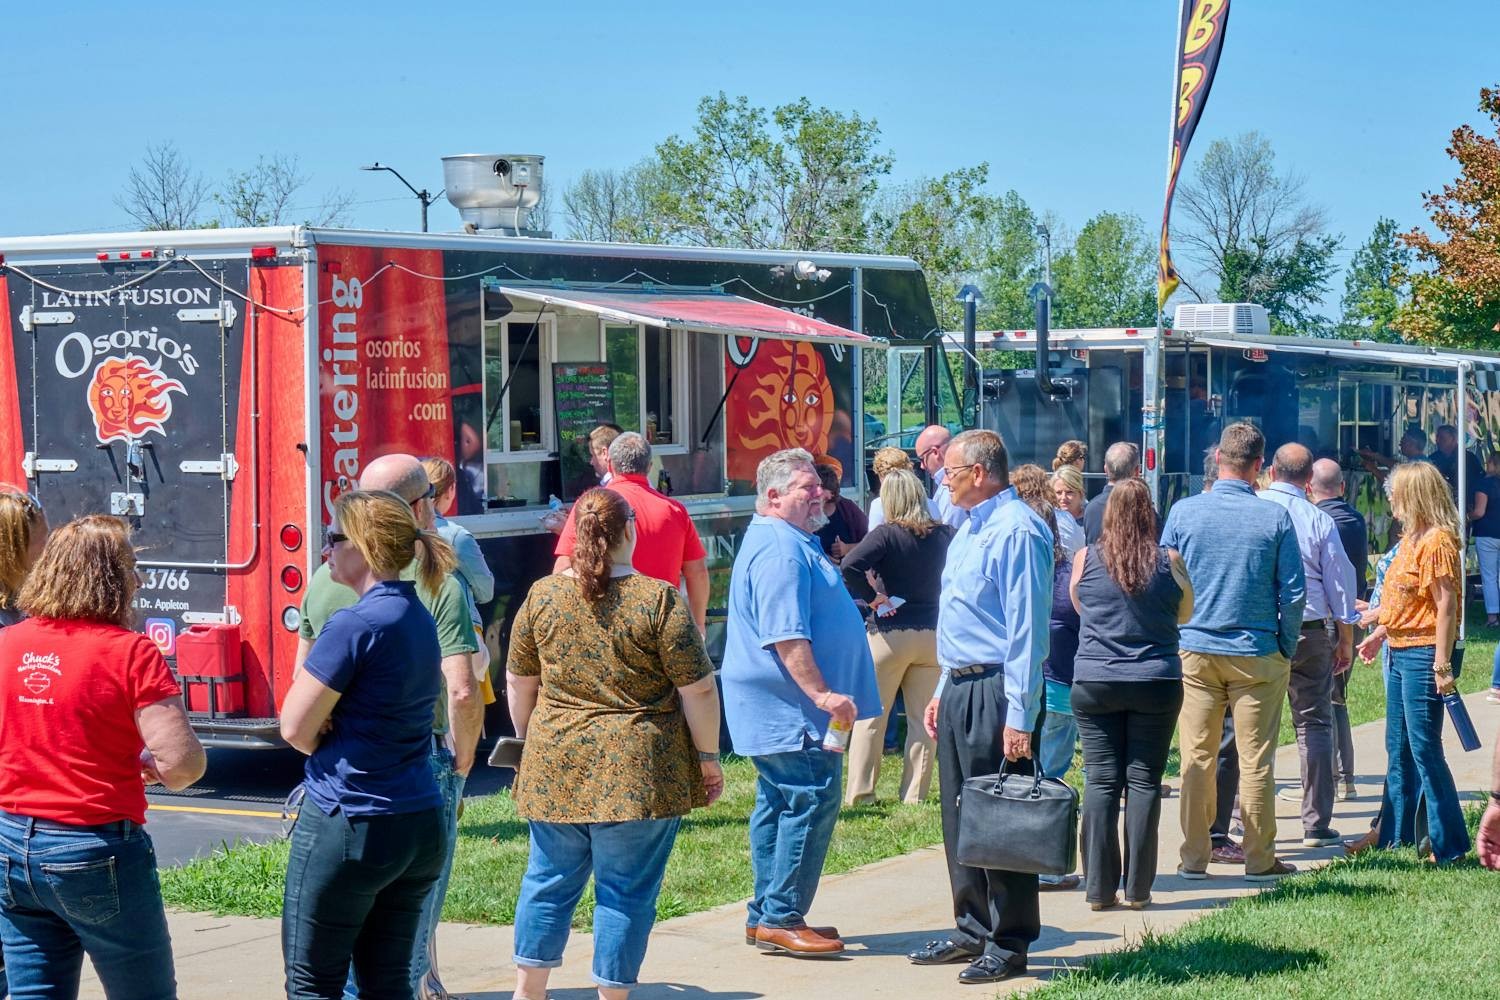 Associates gather on the J. J. Keller corporate campus to connect during walks, food truck rallies and farmers markets.